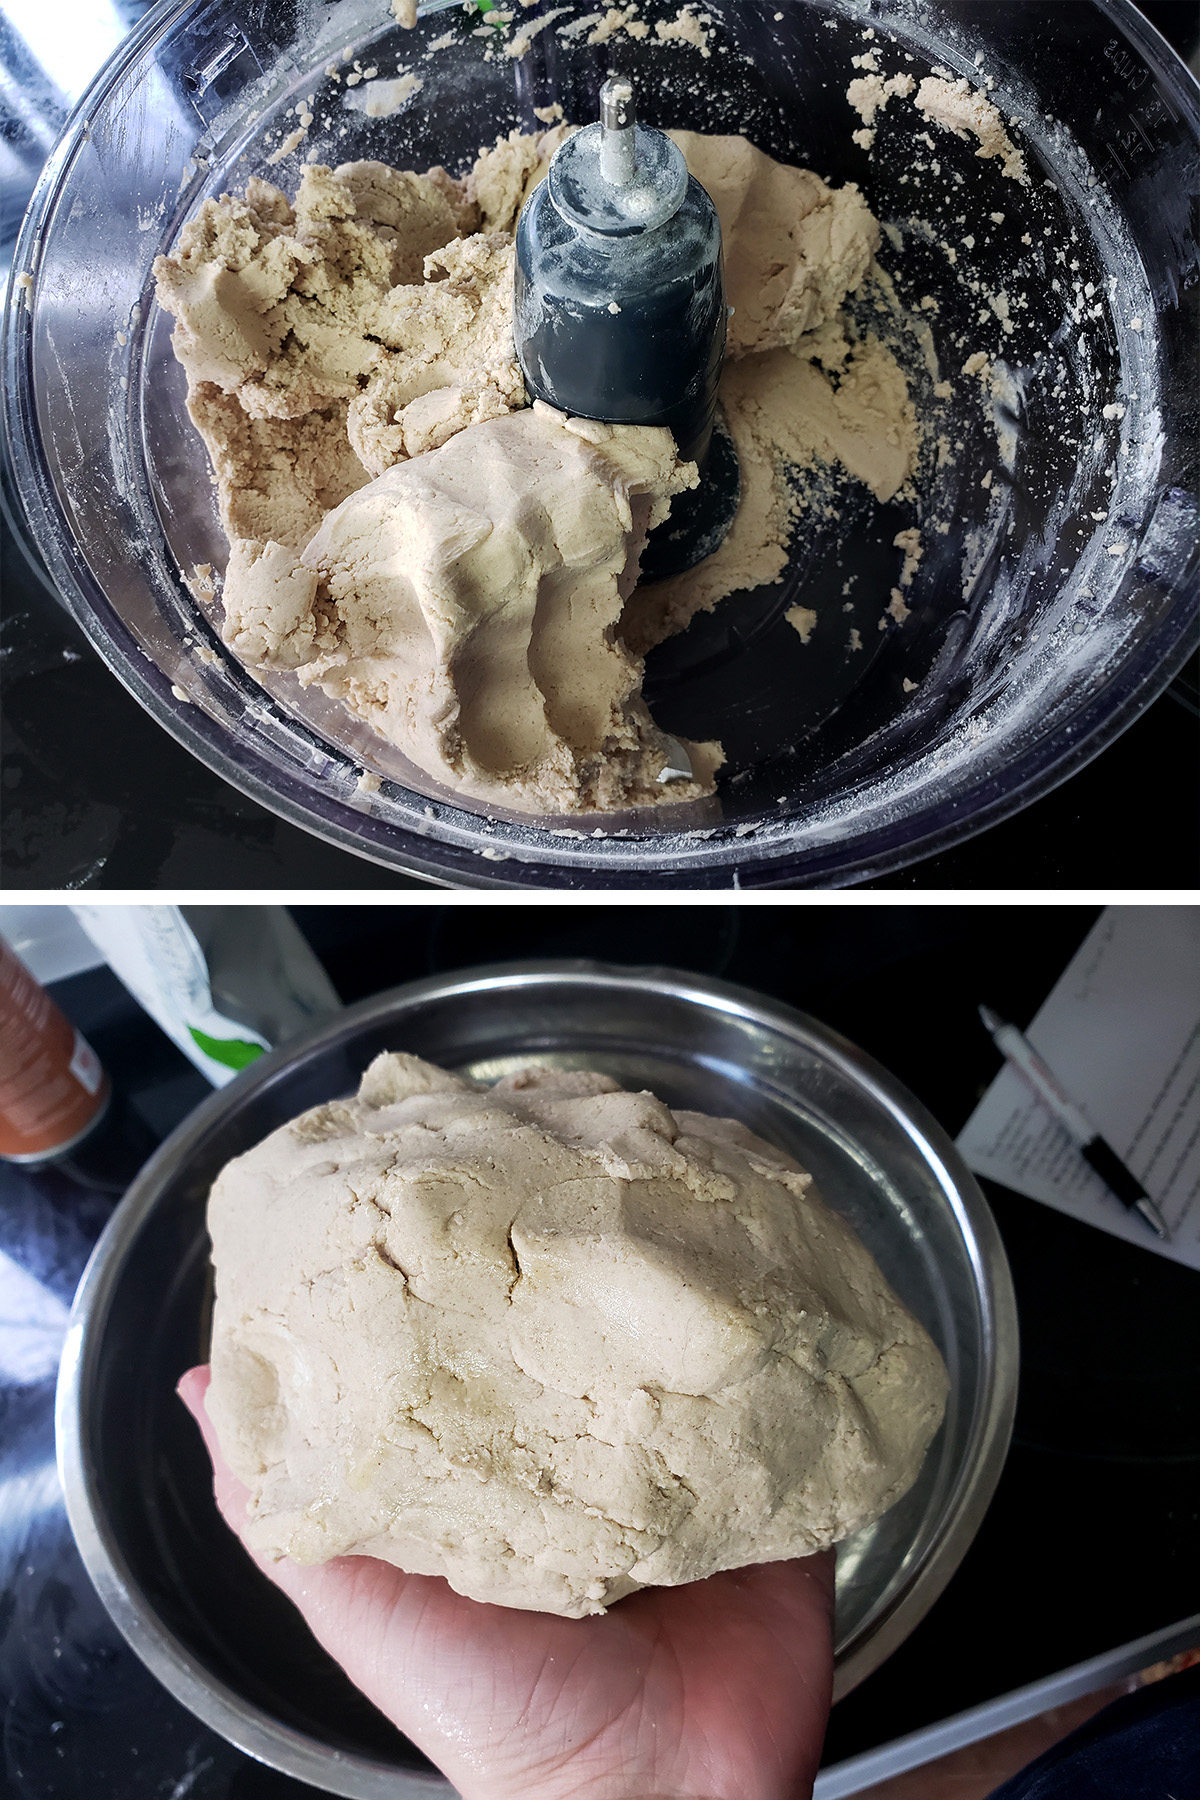 Cassava flour dough being made in a food processor, then held in a hand.